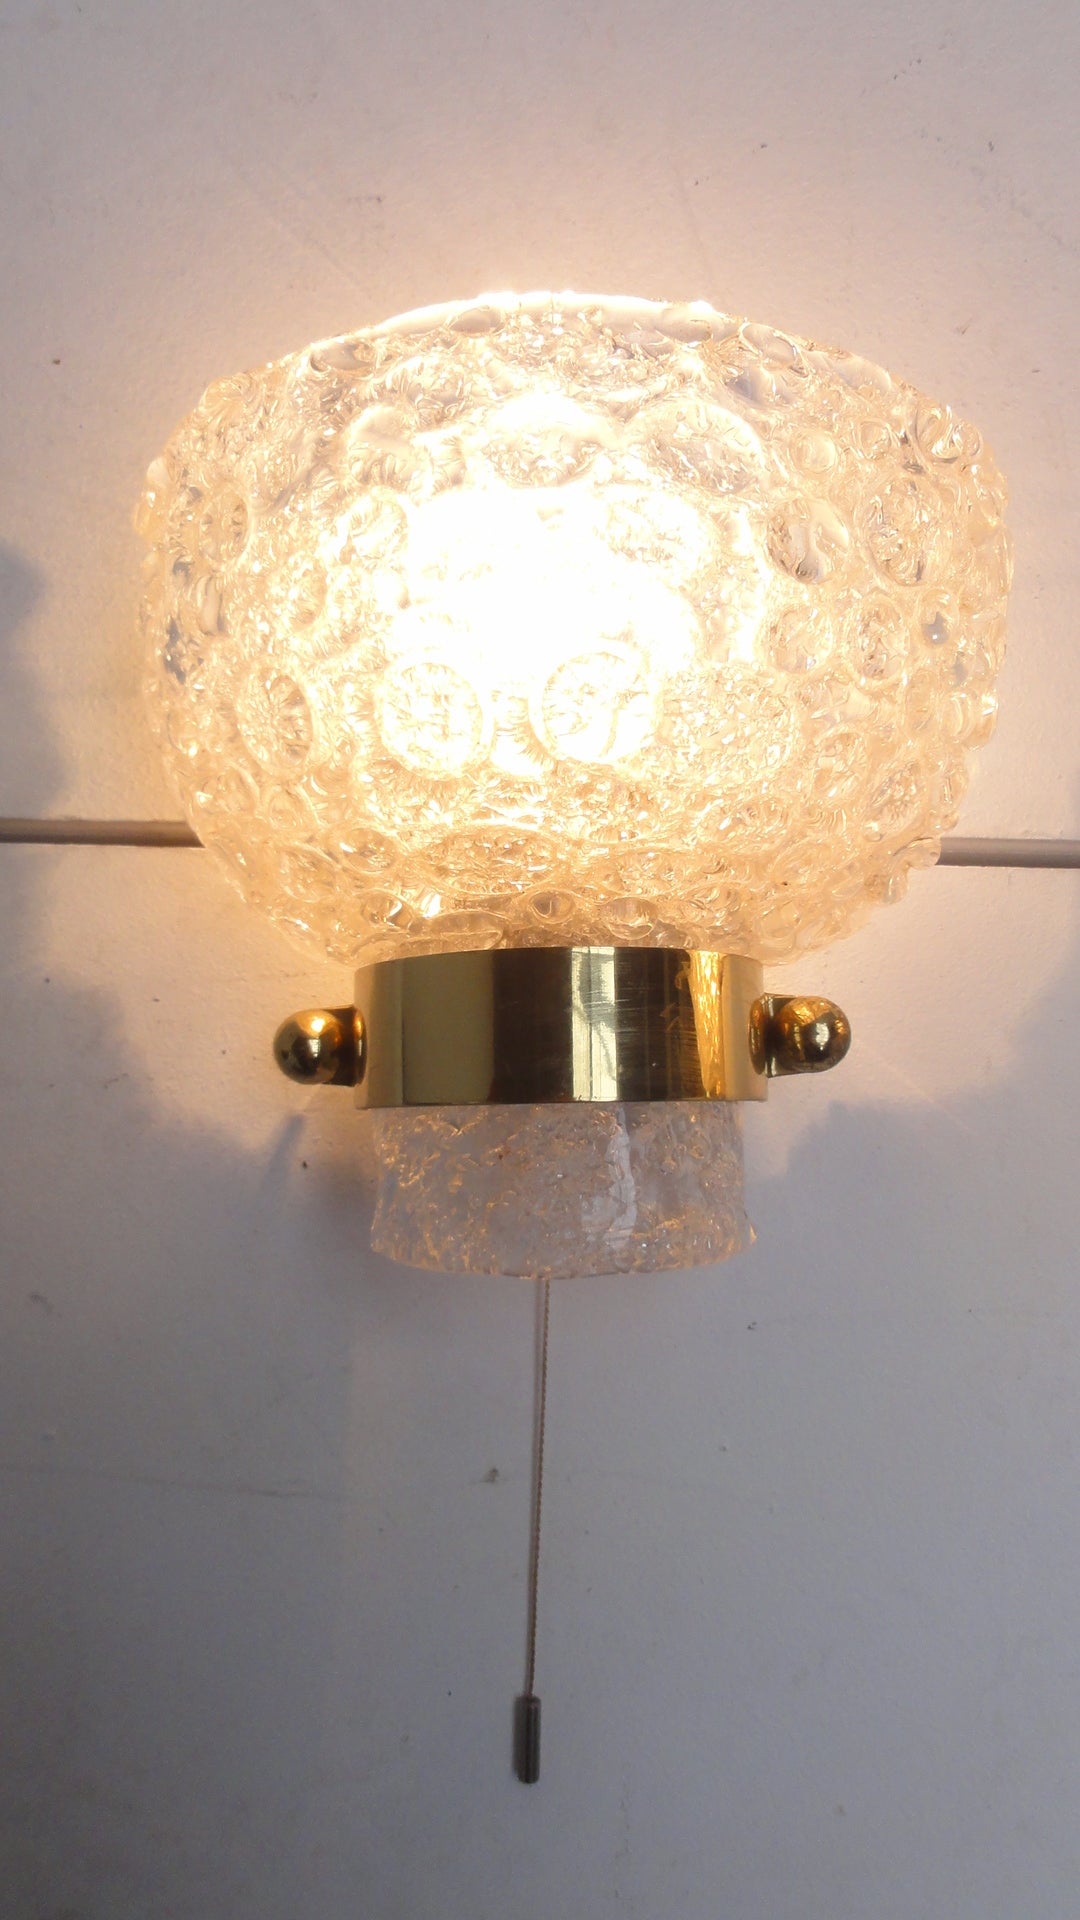 Textured Ice Crystal Glass & Brass Wall Sconces by Kaiser Germany 1960's For Sale 3